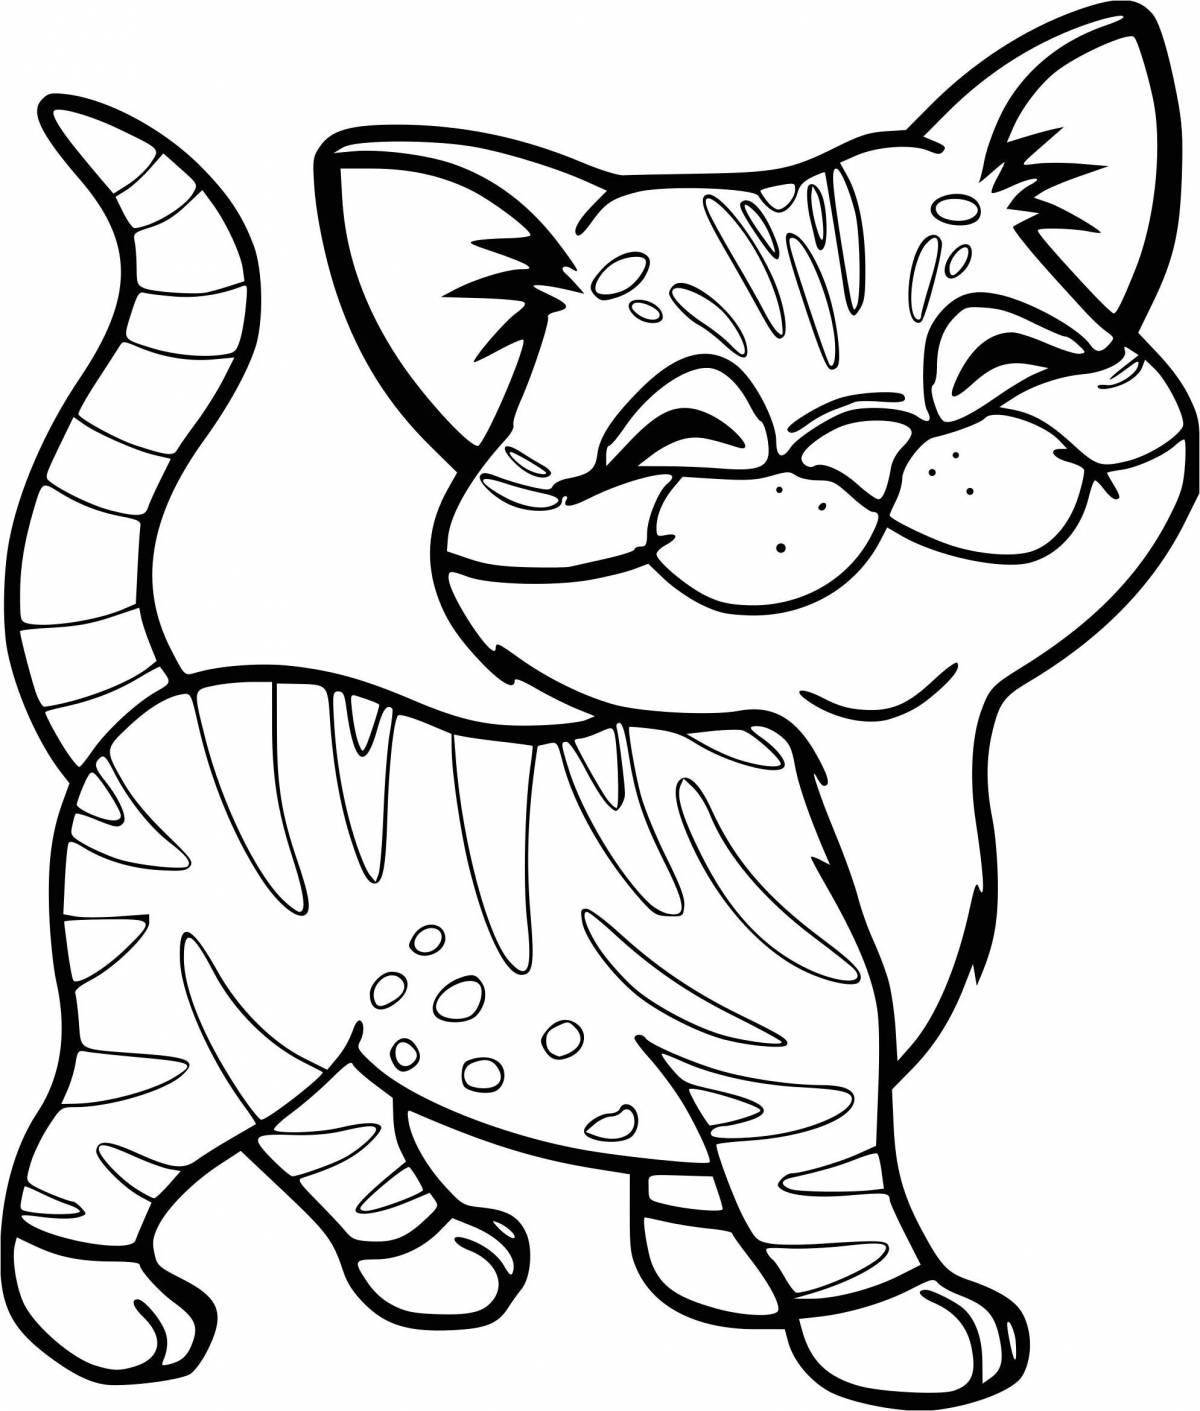 Coloring page fluffy tabby kitten